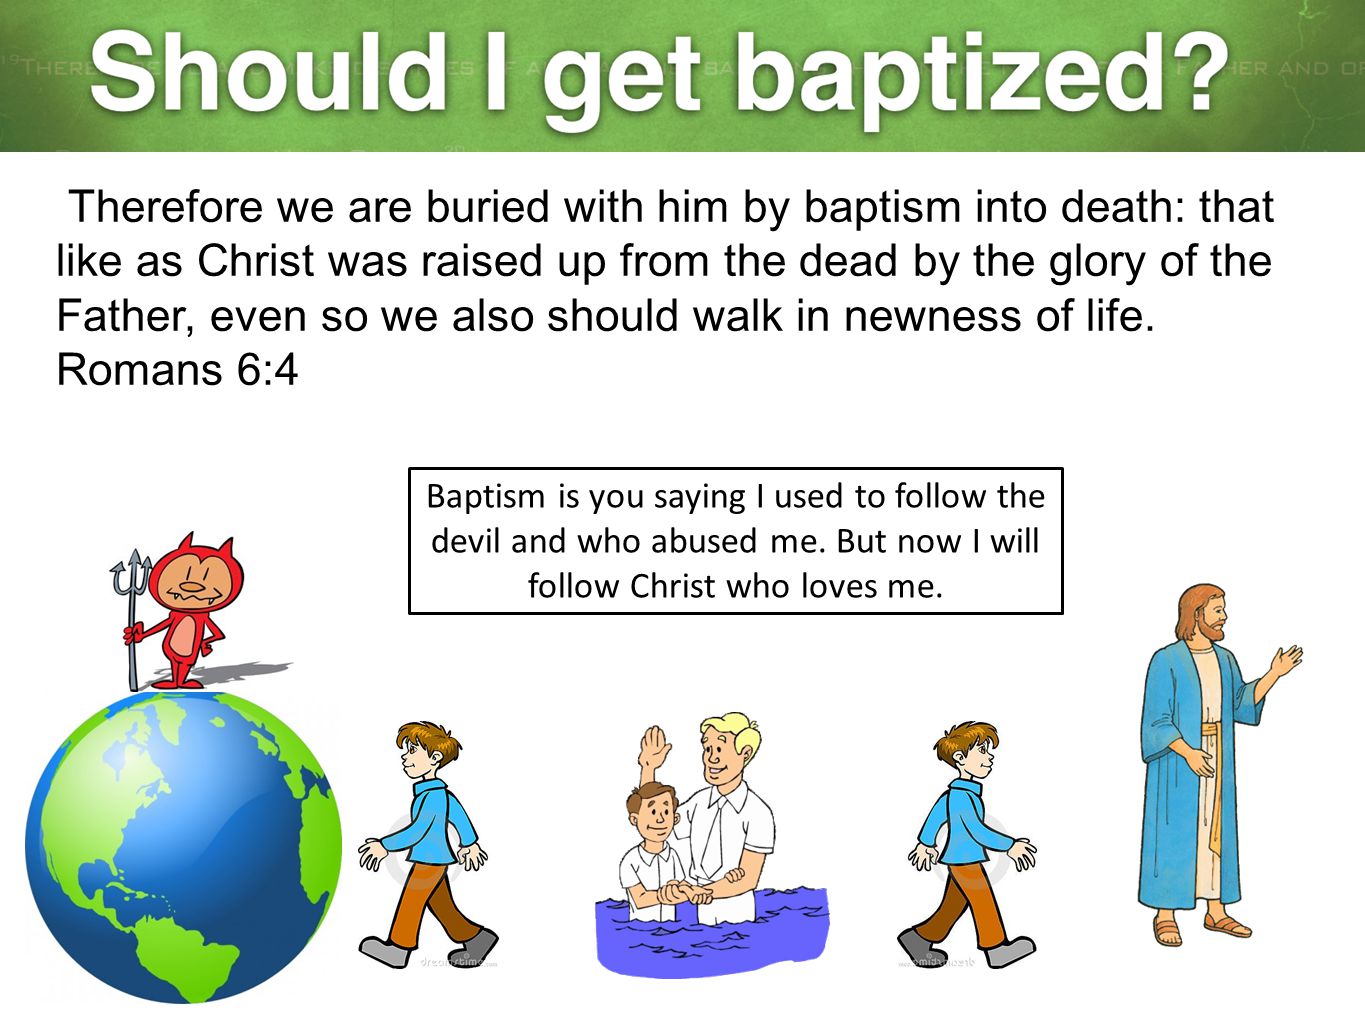 Therefore we are buried with him by baptism into death: that like as Christ was raised up from the dead by the glory of the Father, even so we also should walk in newness of life. Romans 6:4